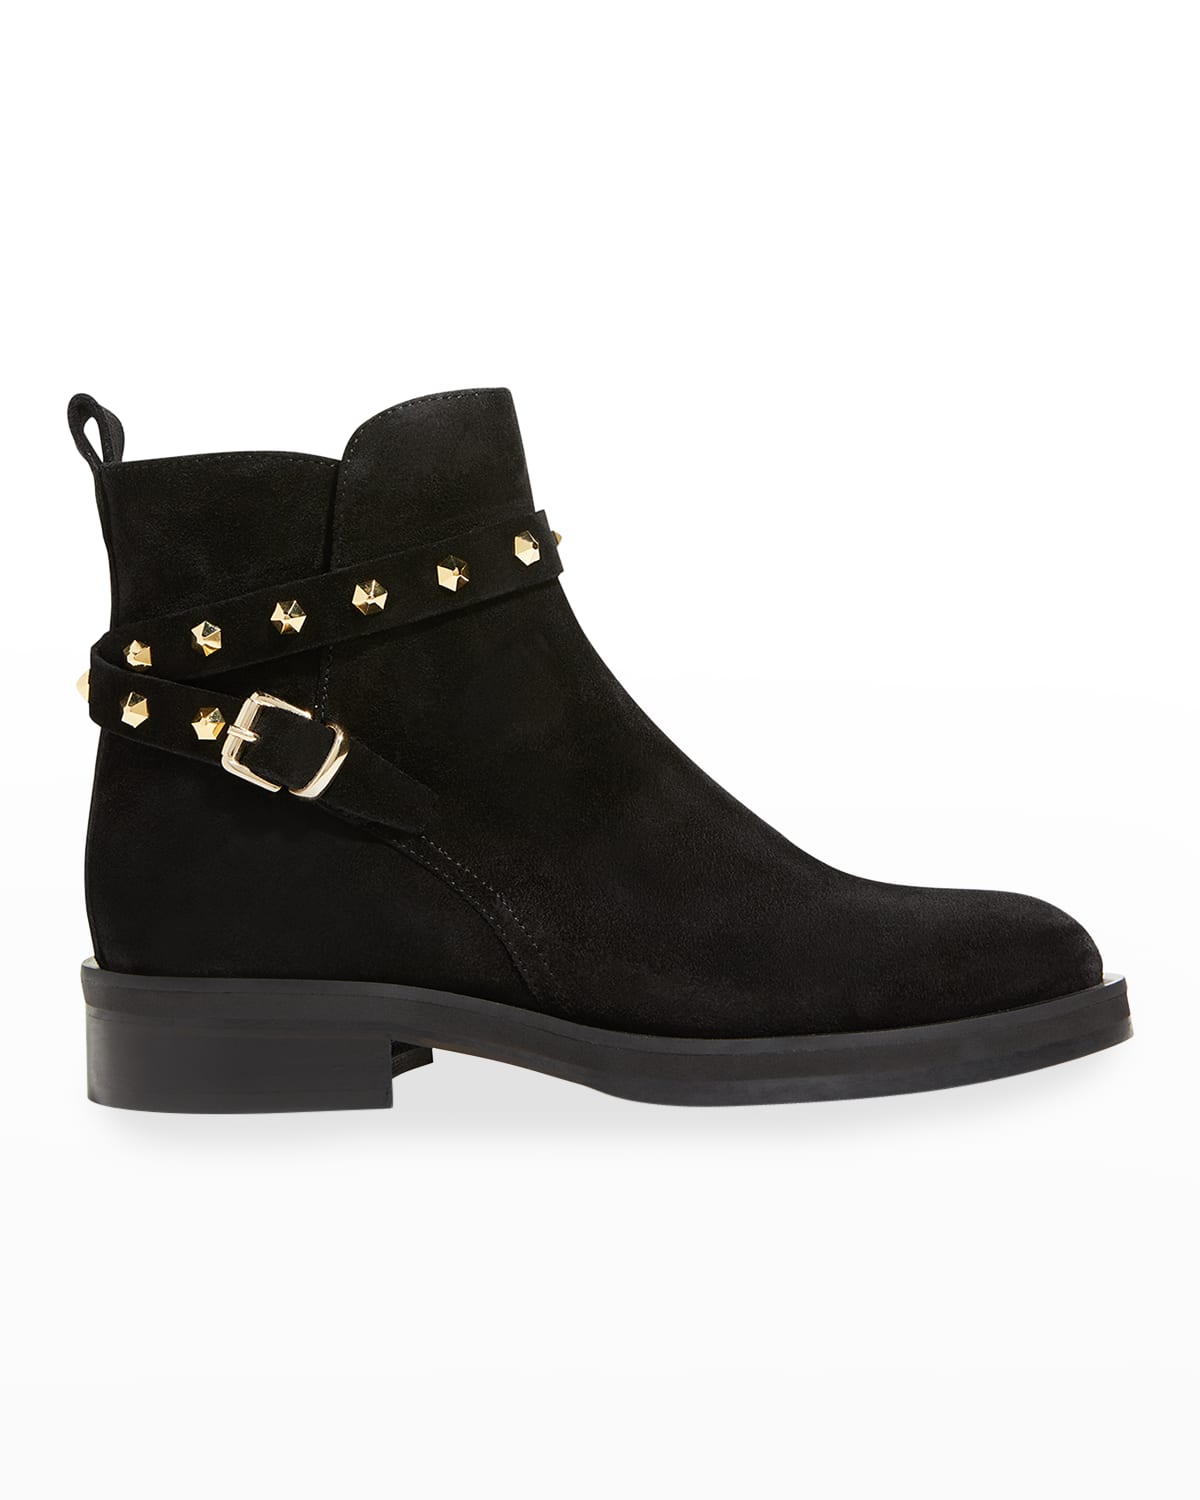 Black Studded Ankle Boots | Neiman Marcus